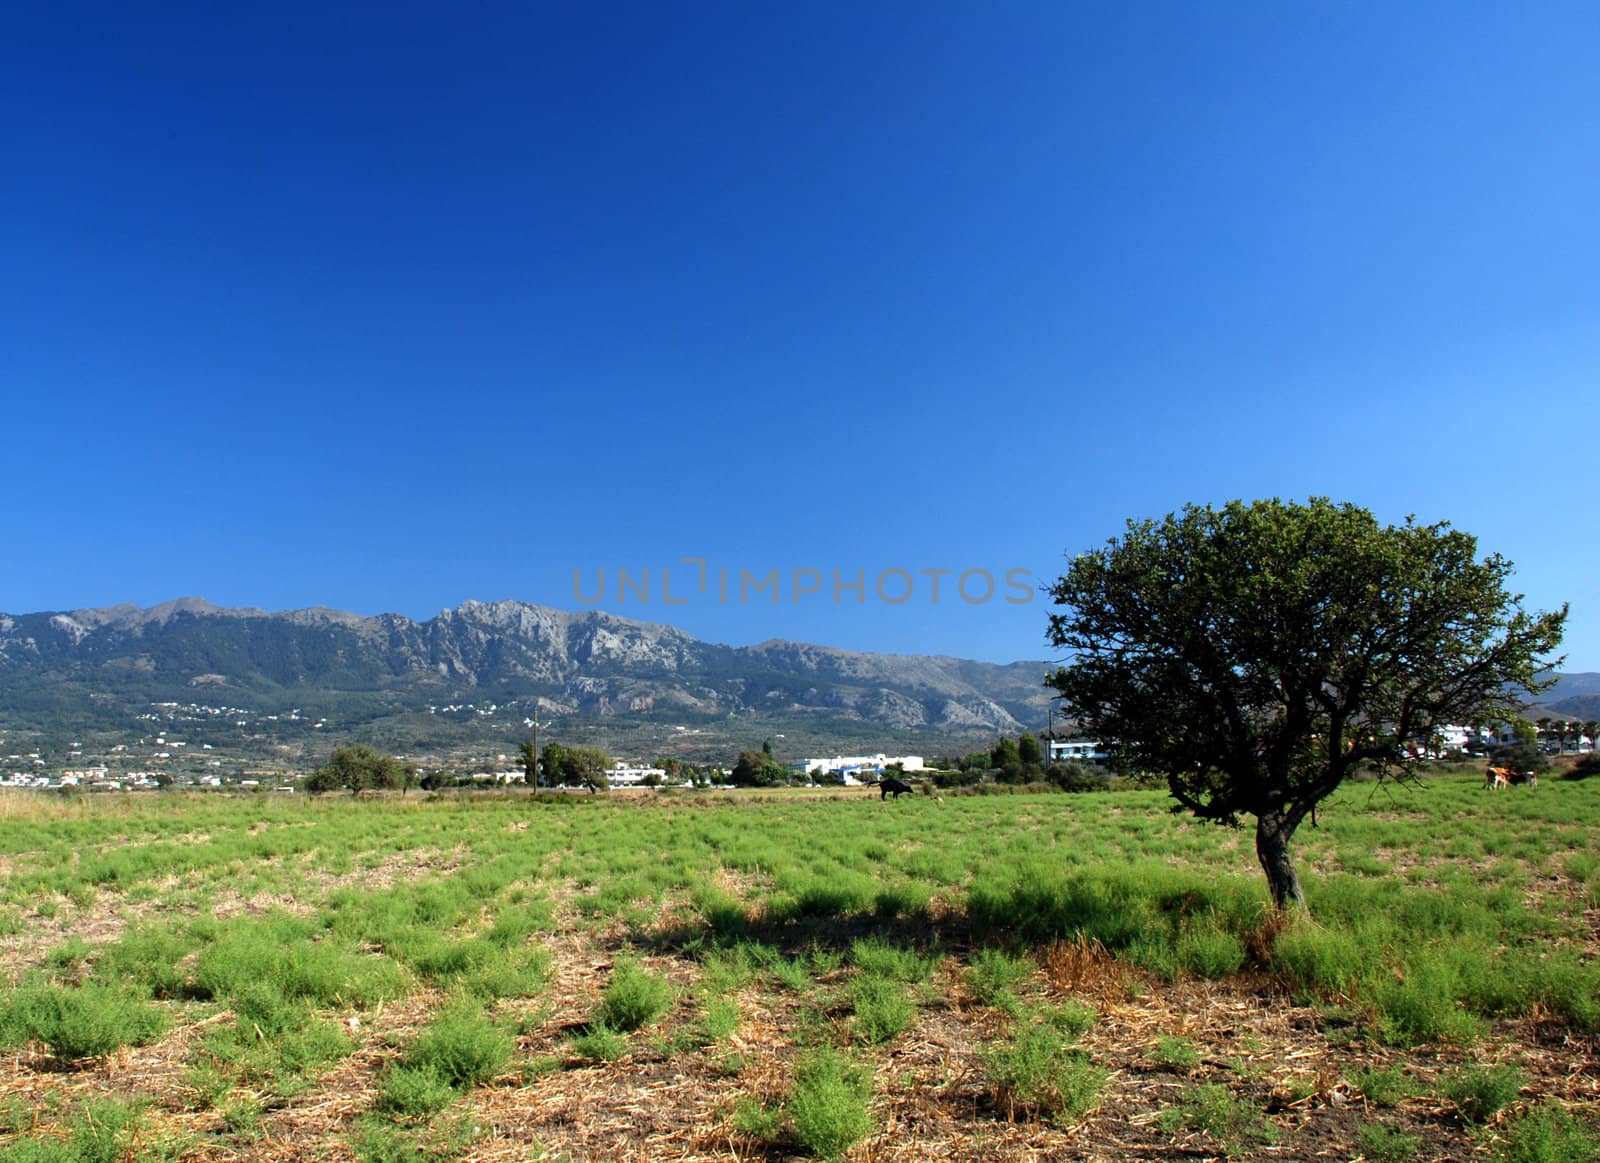 Plain with cows and single olive tree and mountains in the back